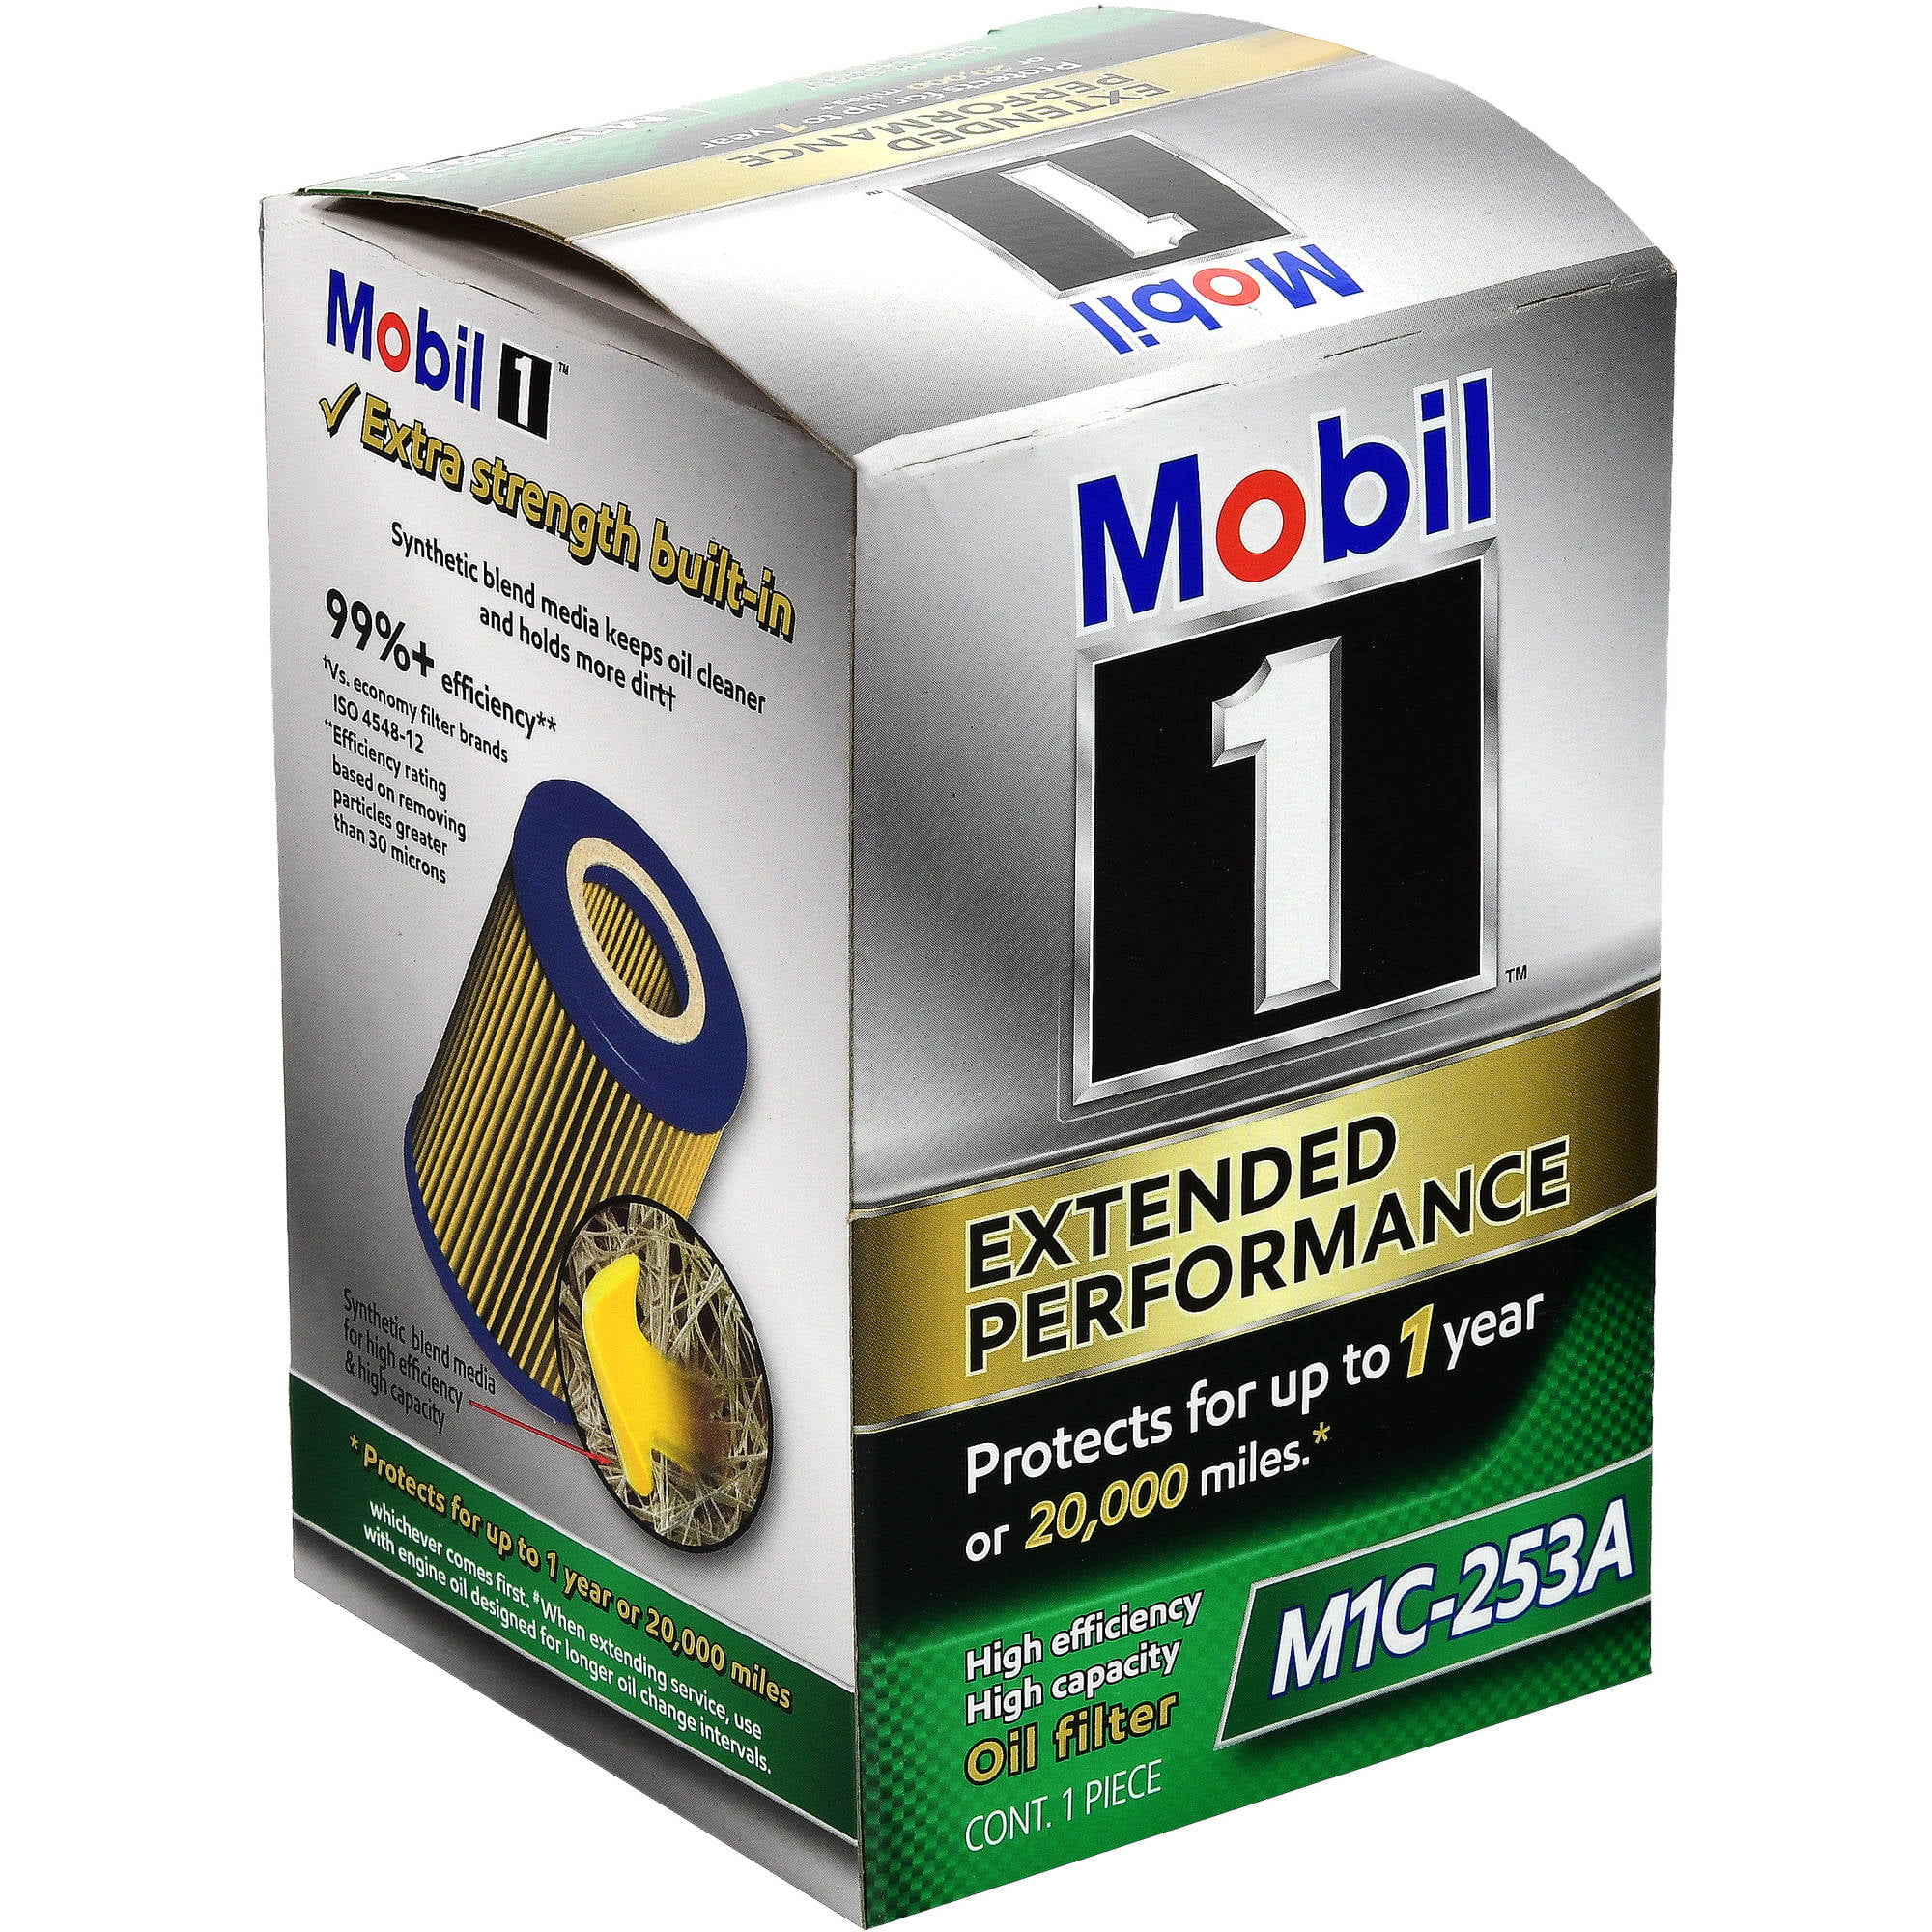 Who Sells Mobil 1 Oil